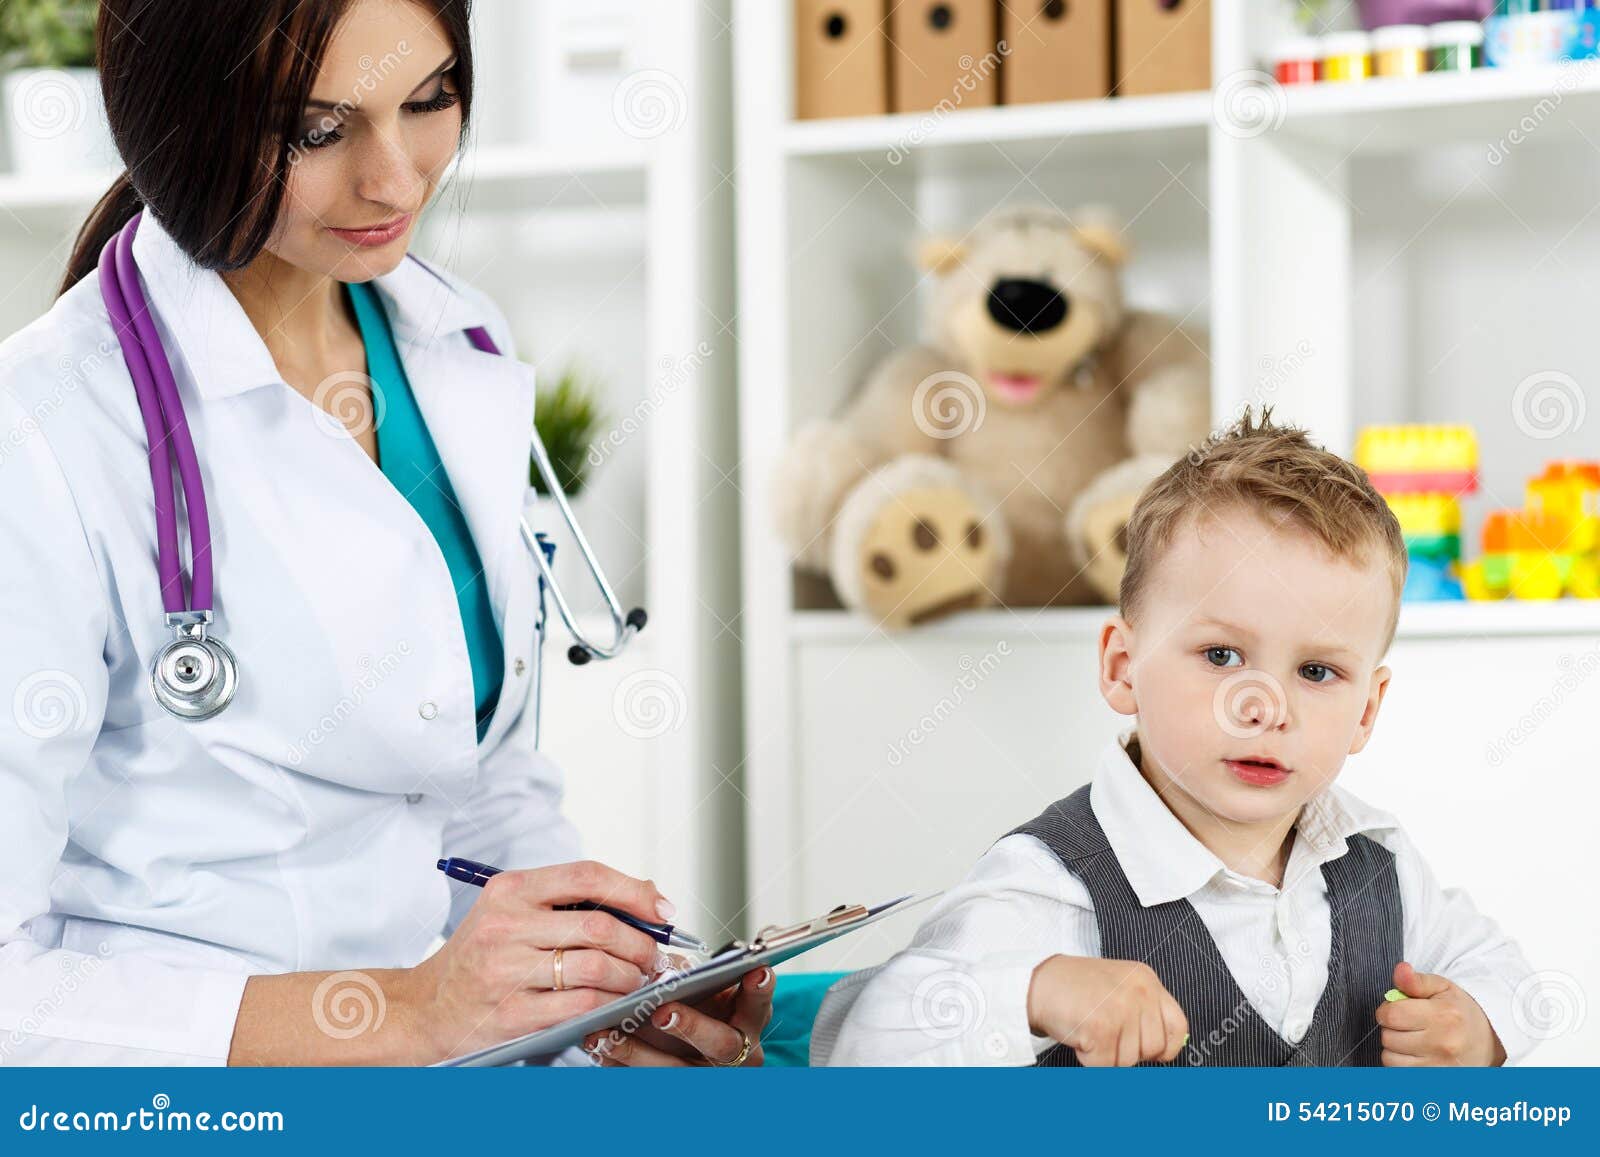 pediatrician communicating with patient